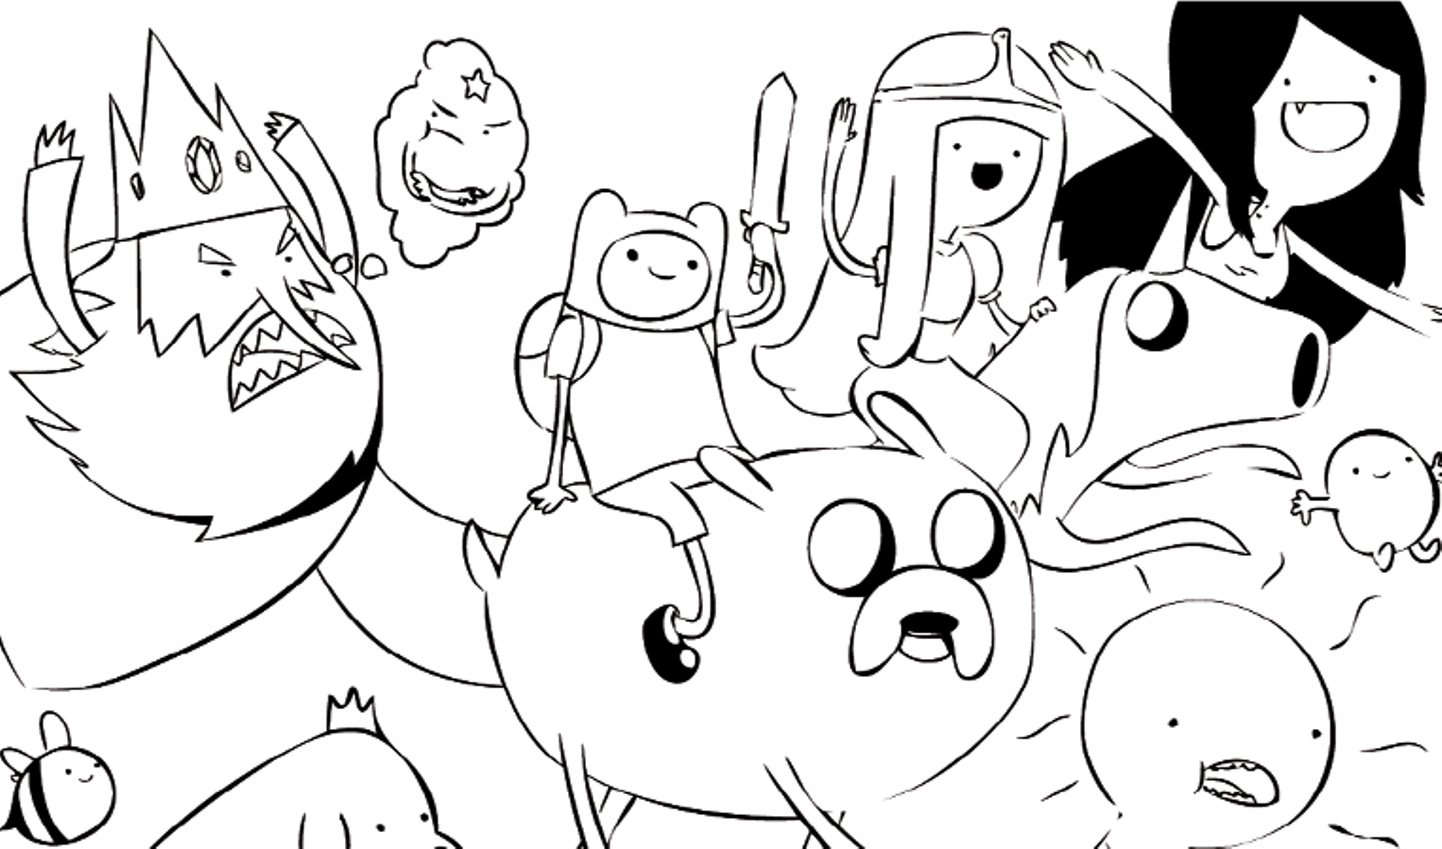 7700 Top Adventure Time Coloring Pages Marceline Images & Pictures In HD